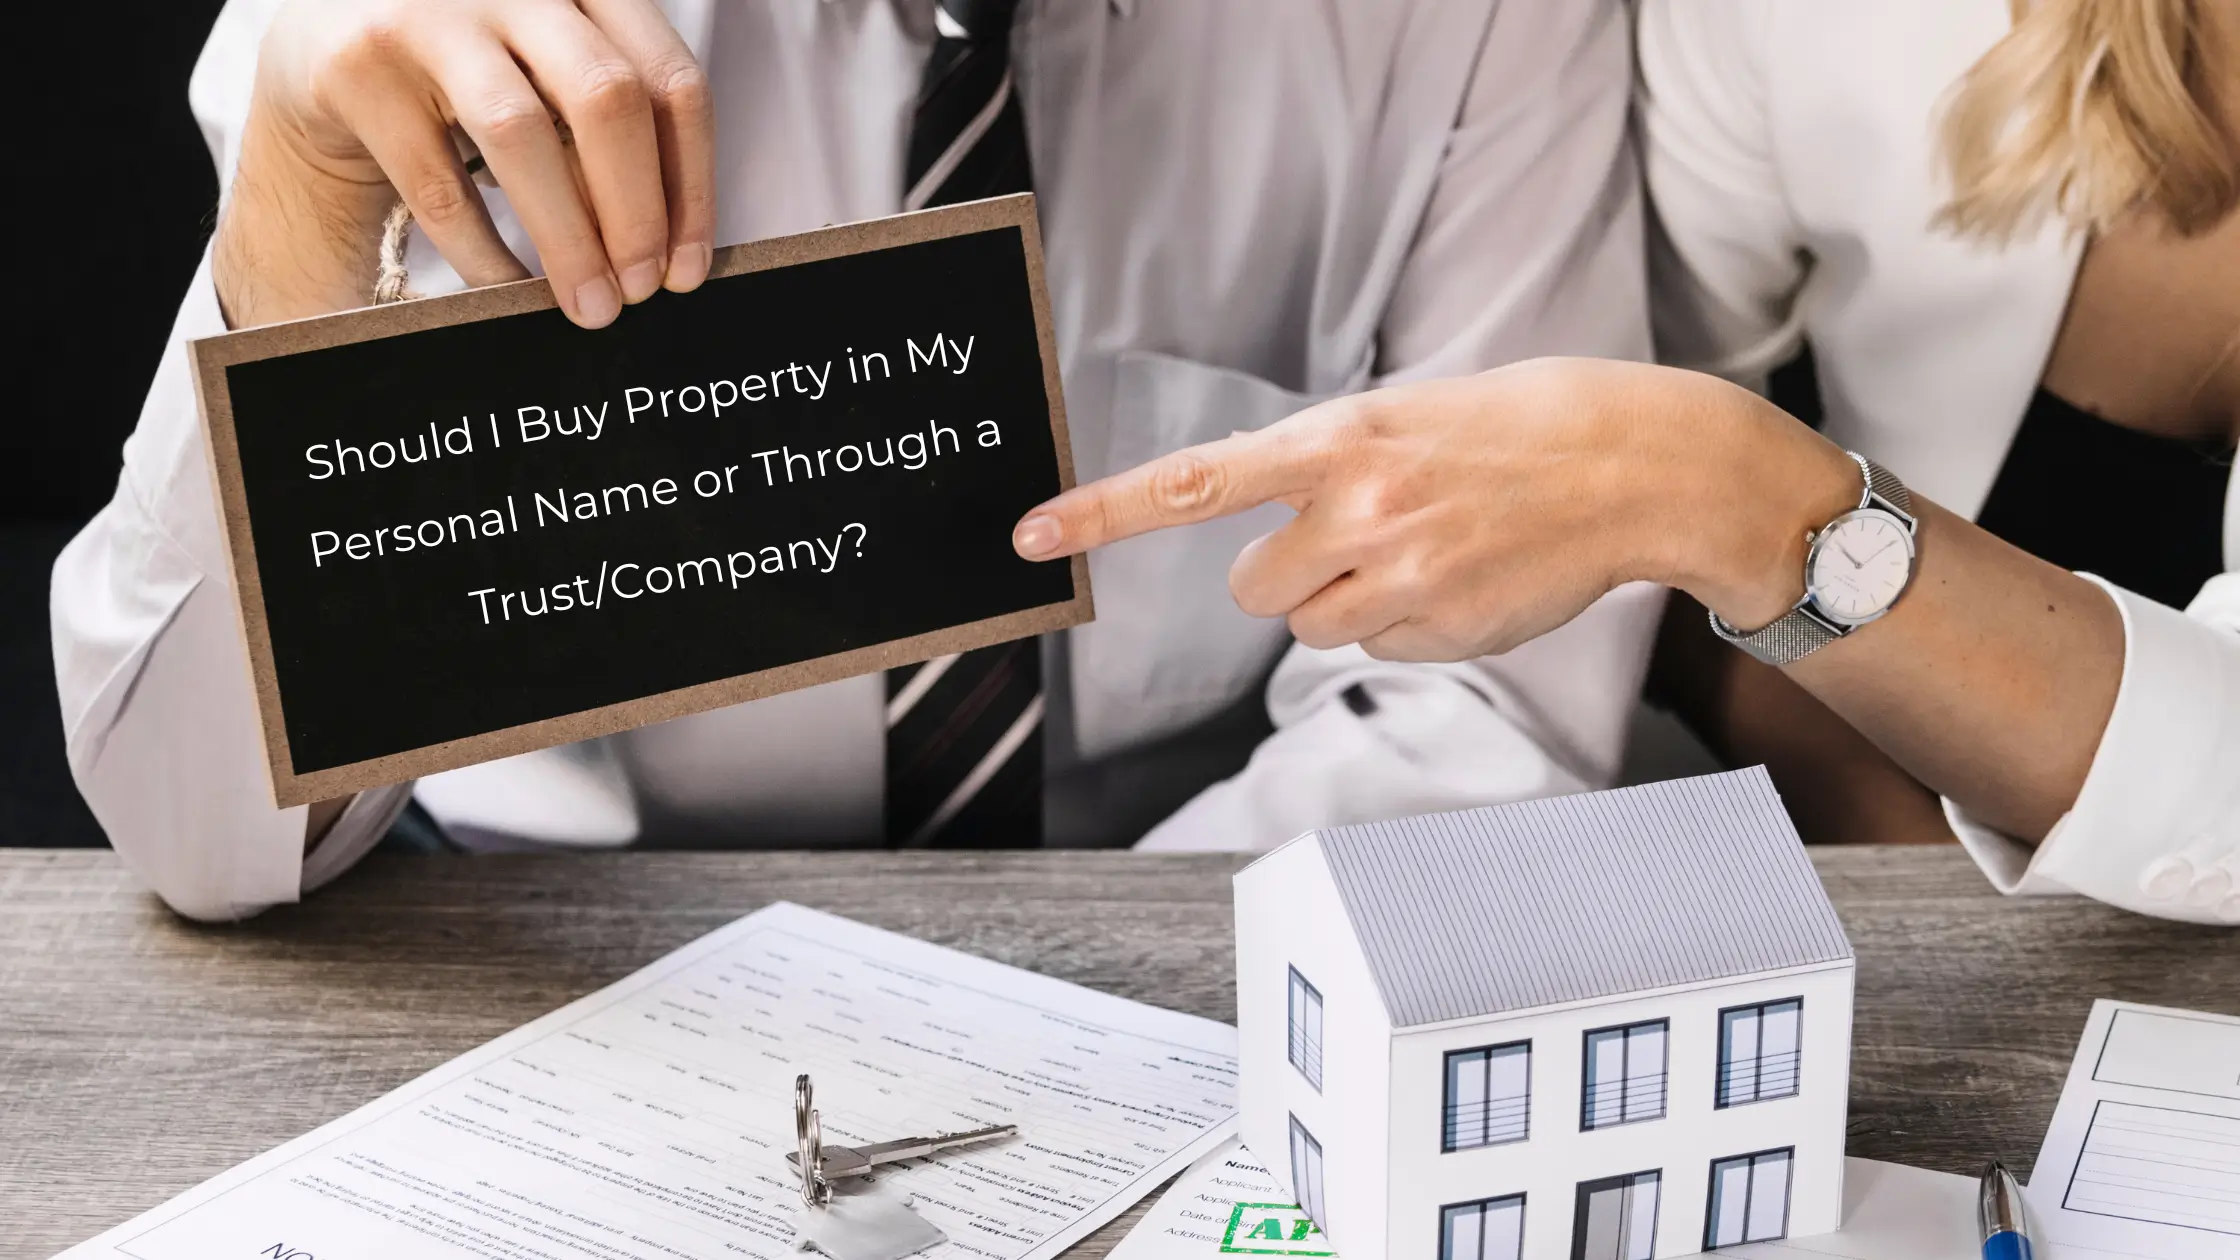 Buy investment Property in Personal Name or Trustcompany